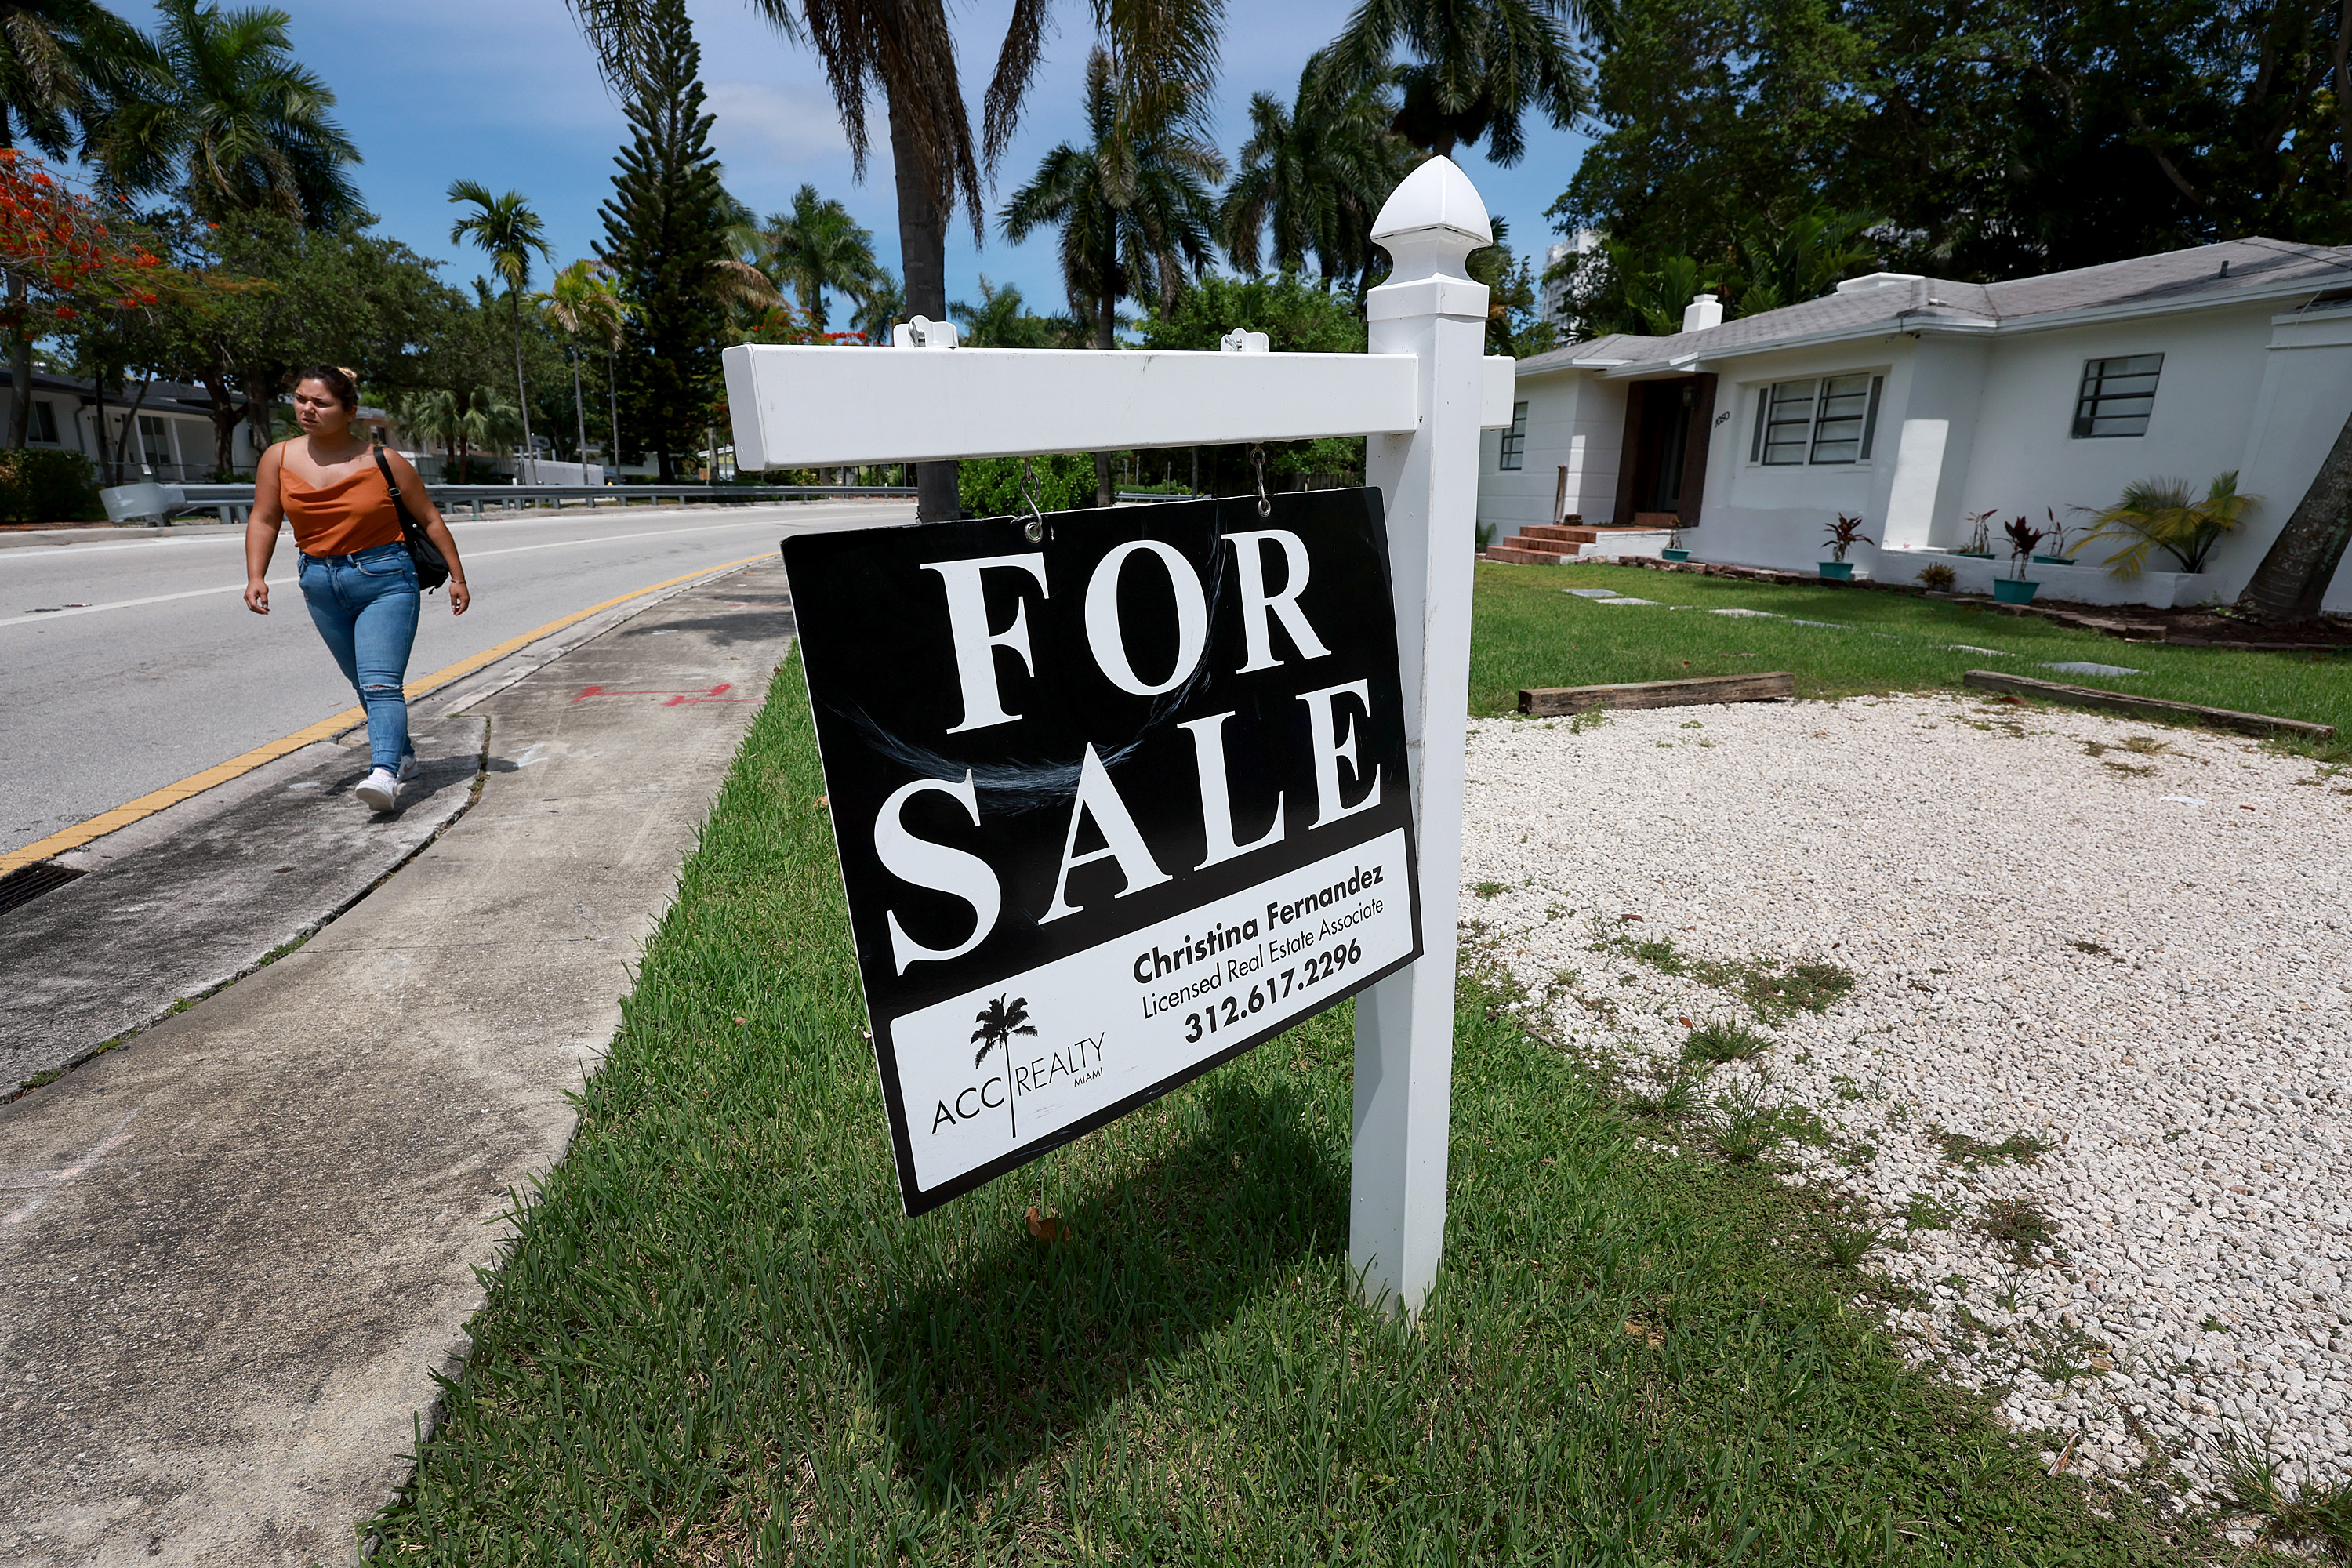 A 'for sale' sign hangs in front of a home on June 21 in Miami, Florida.